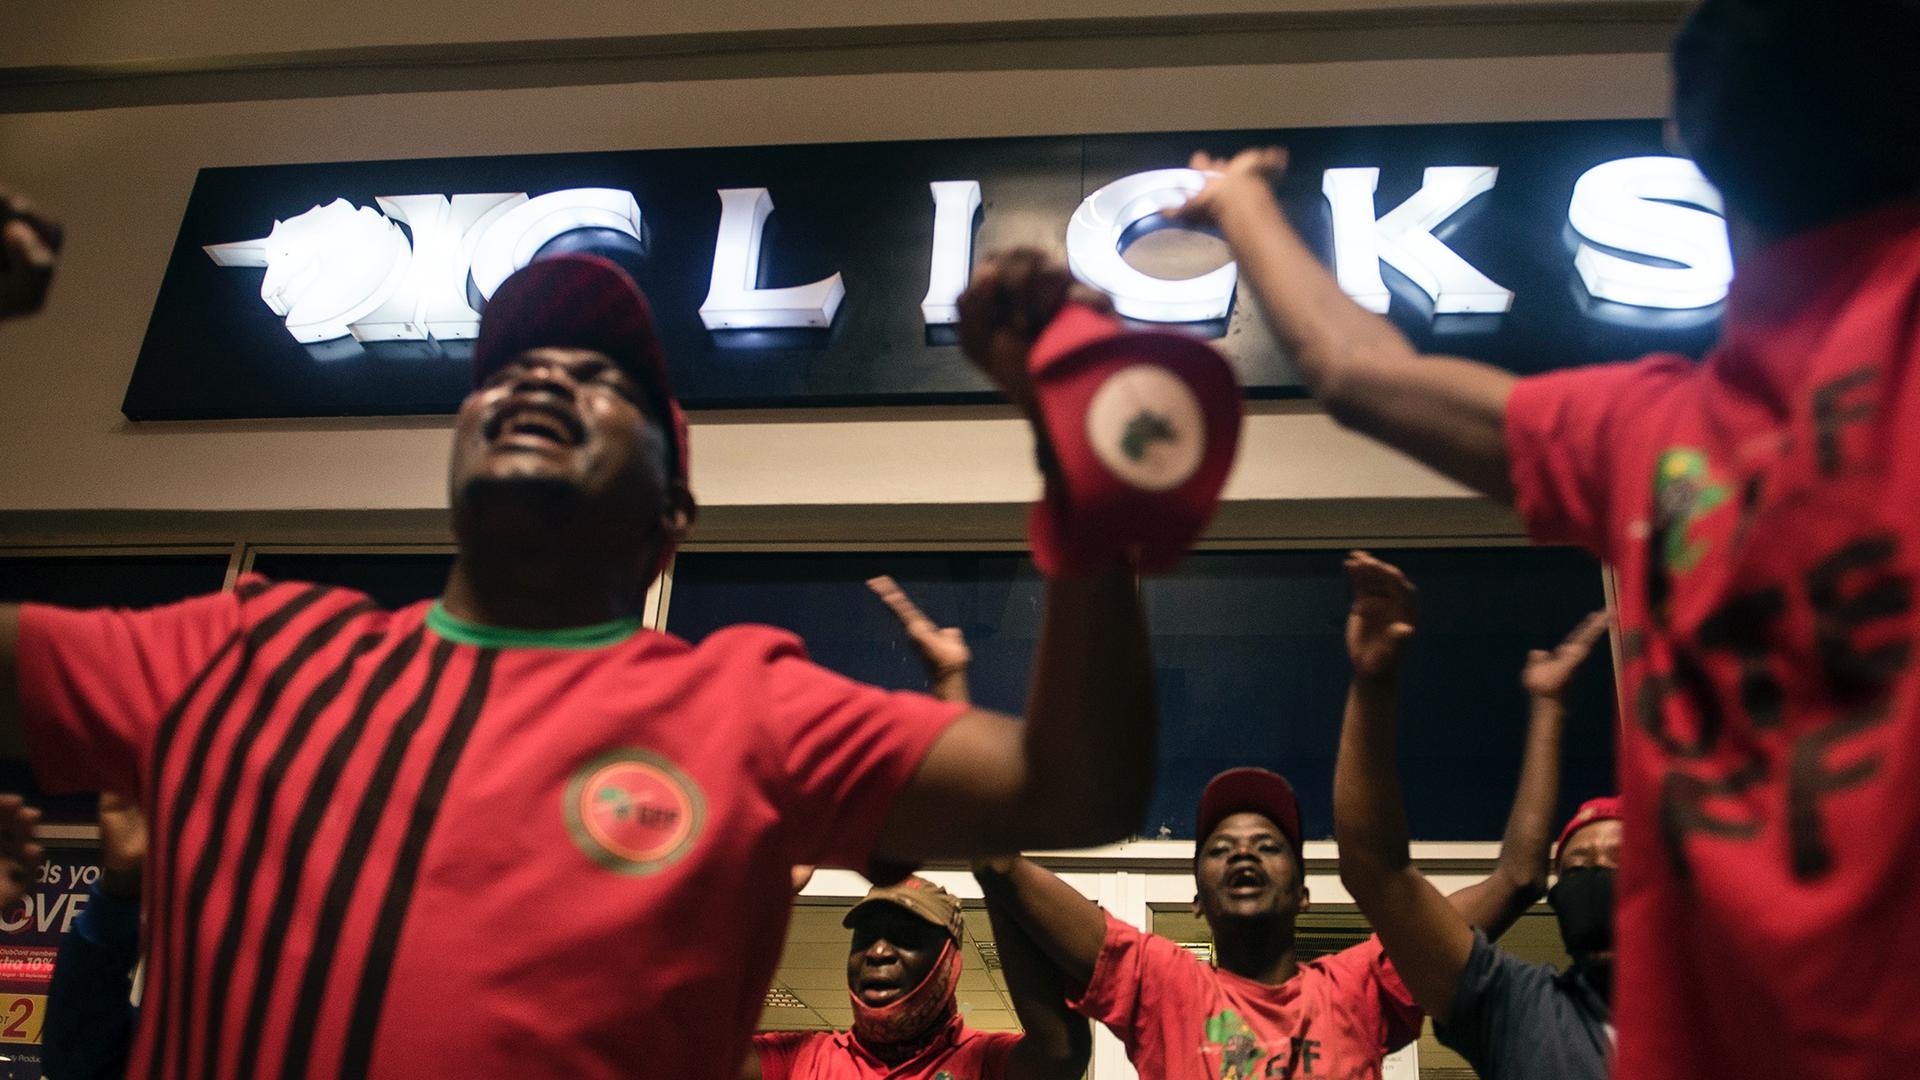 Men and women wearing red political shirts chant in front of a department store in South Africa 